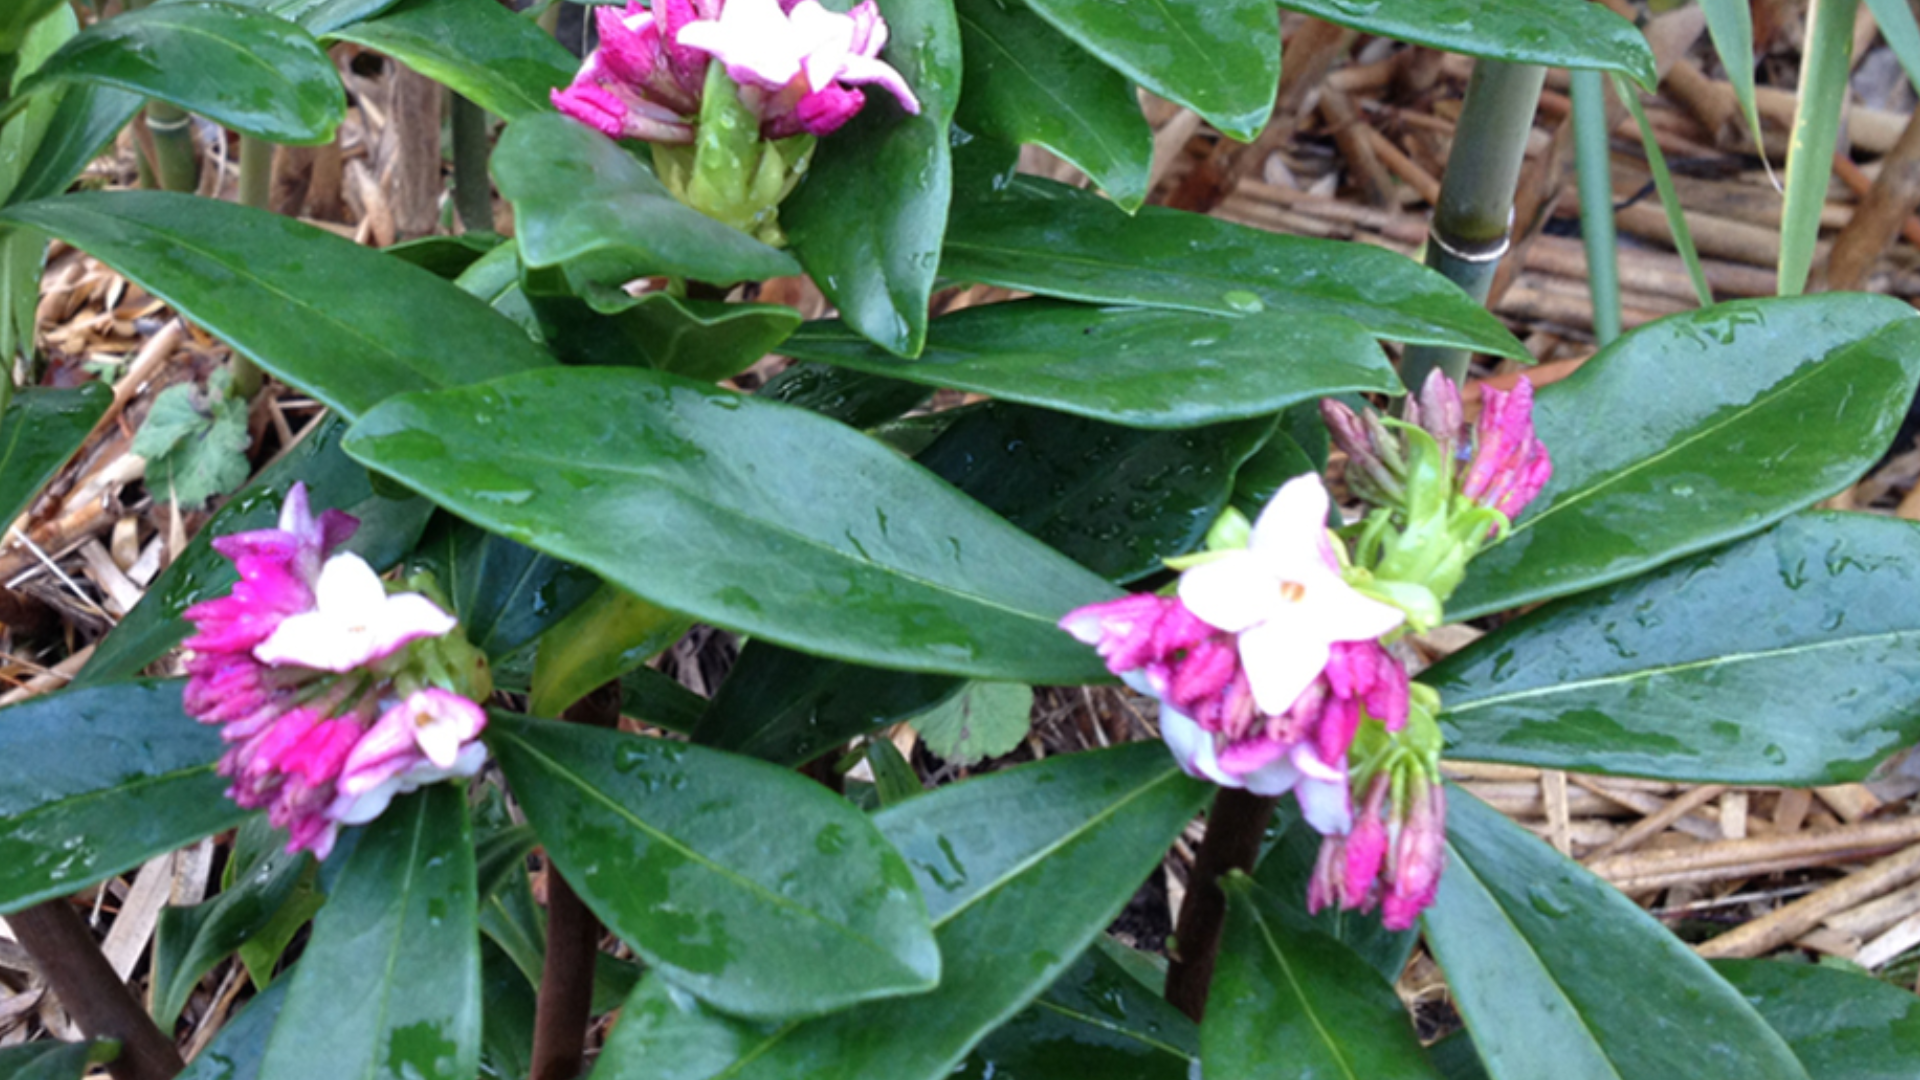 Ciscoe Morris calls the Daphne odora the "queen of the fragrant plants" but she's temperamental with a mind of her own.